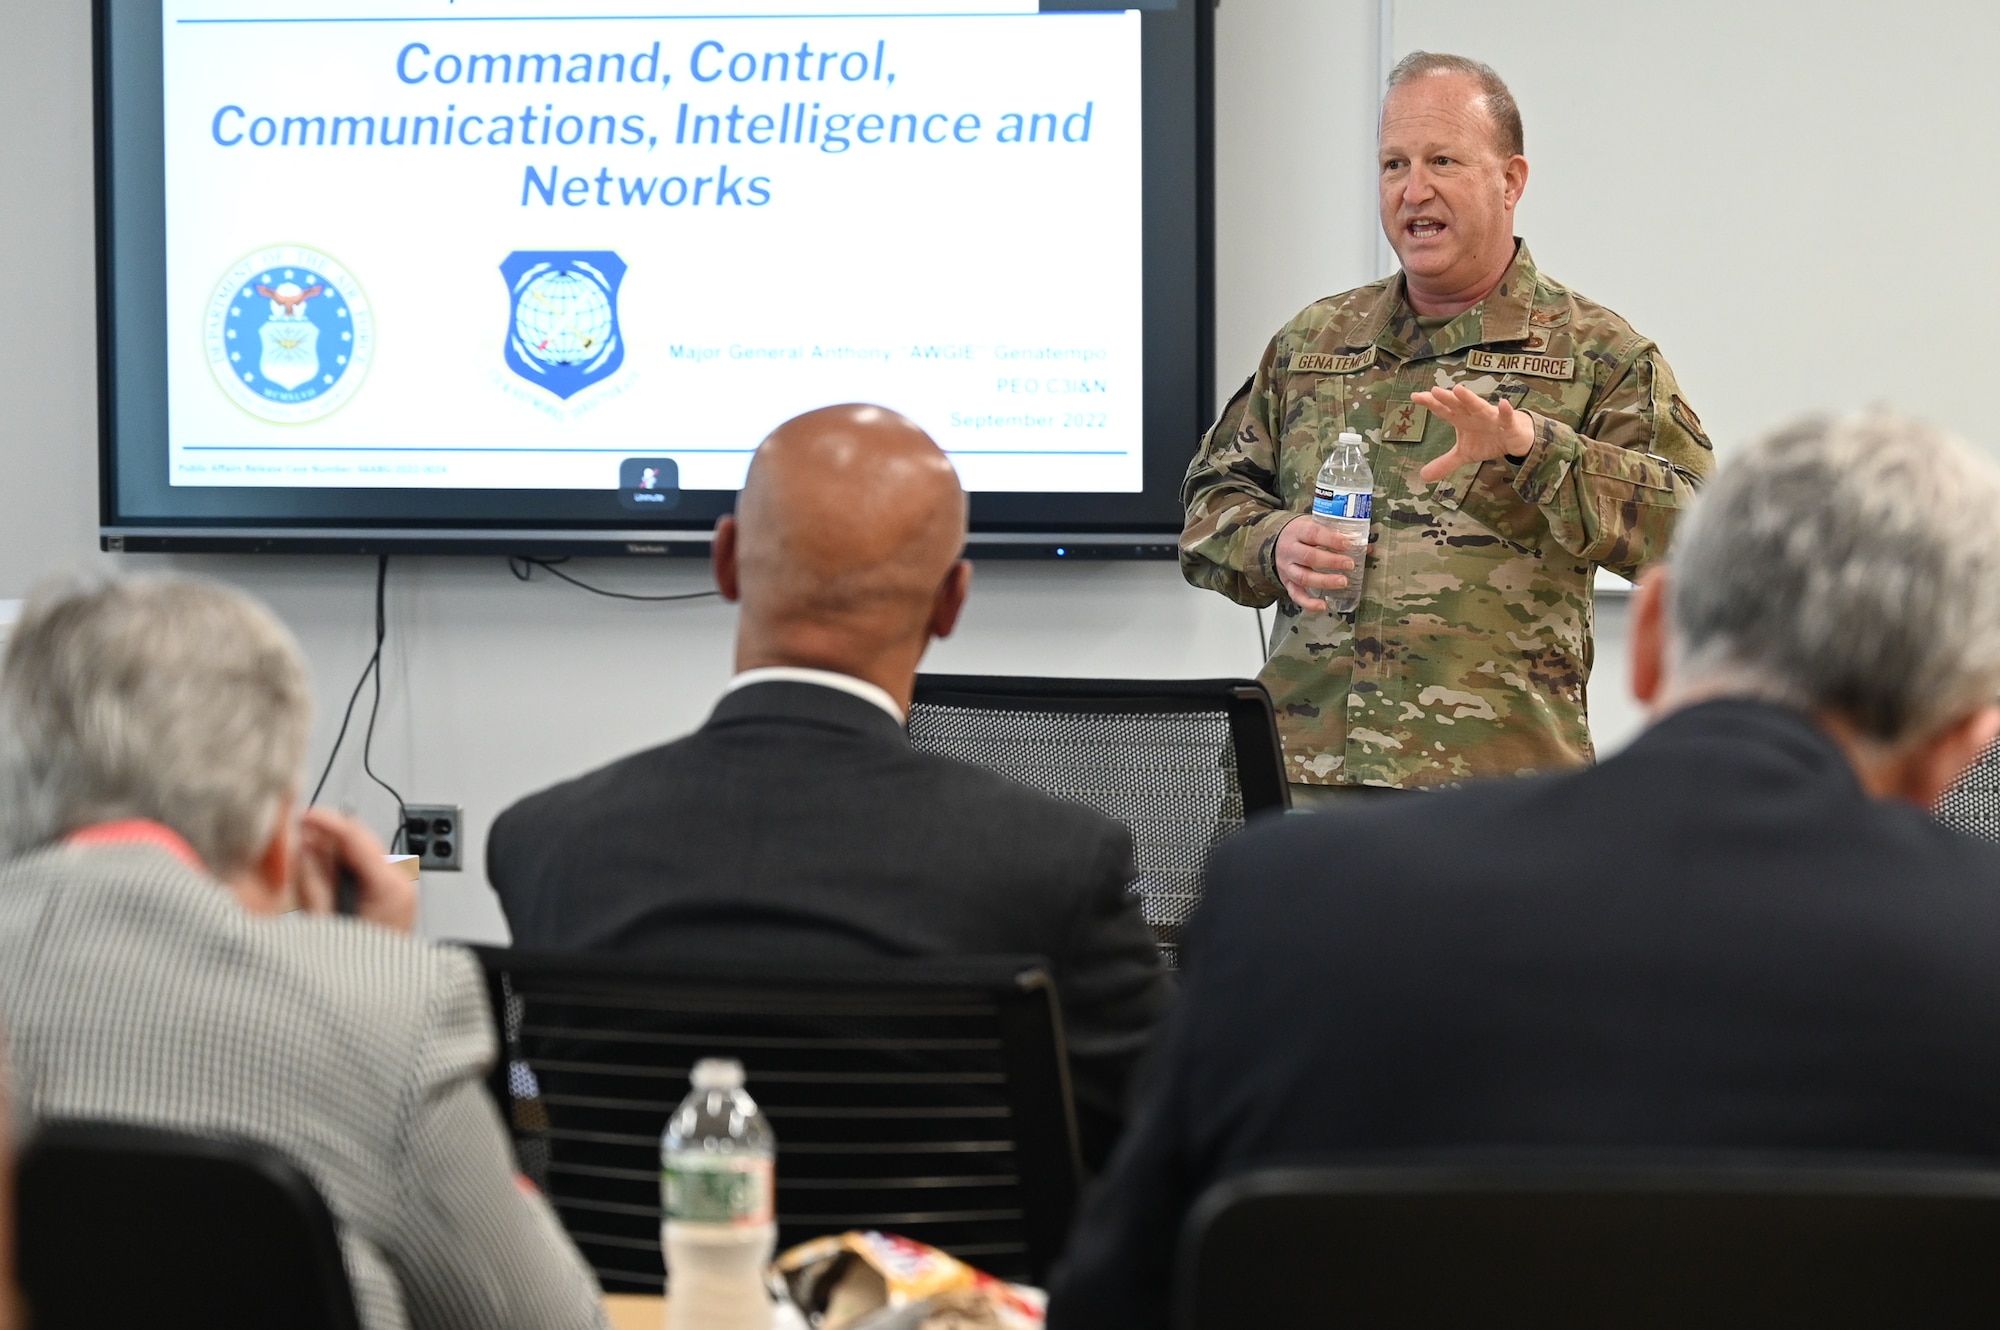 Maj. Gen. Anthony Genatempo, program executive officer of Command, Control, Communications, Intelligence and Networks, headquartered at Hanscom Air Force Base, Mass., discusses enterprise systems, Joint-All Domain Command and Control, or JADC2, and other topics during a recent meeting with the Hanscom Representatives Association at the University of Mass. Lowell Research Institute’s Northstar Campus in Lincoln, Mass. The HRA brings representatives from small, large, and start-up Hanscom-area businesses together to encourage collaboration in the acquisition process. (U.S. Air Force photo by Mark Herlihy)